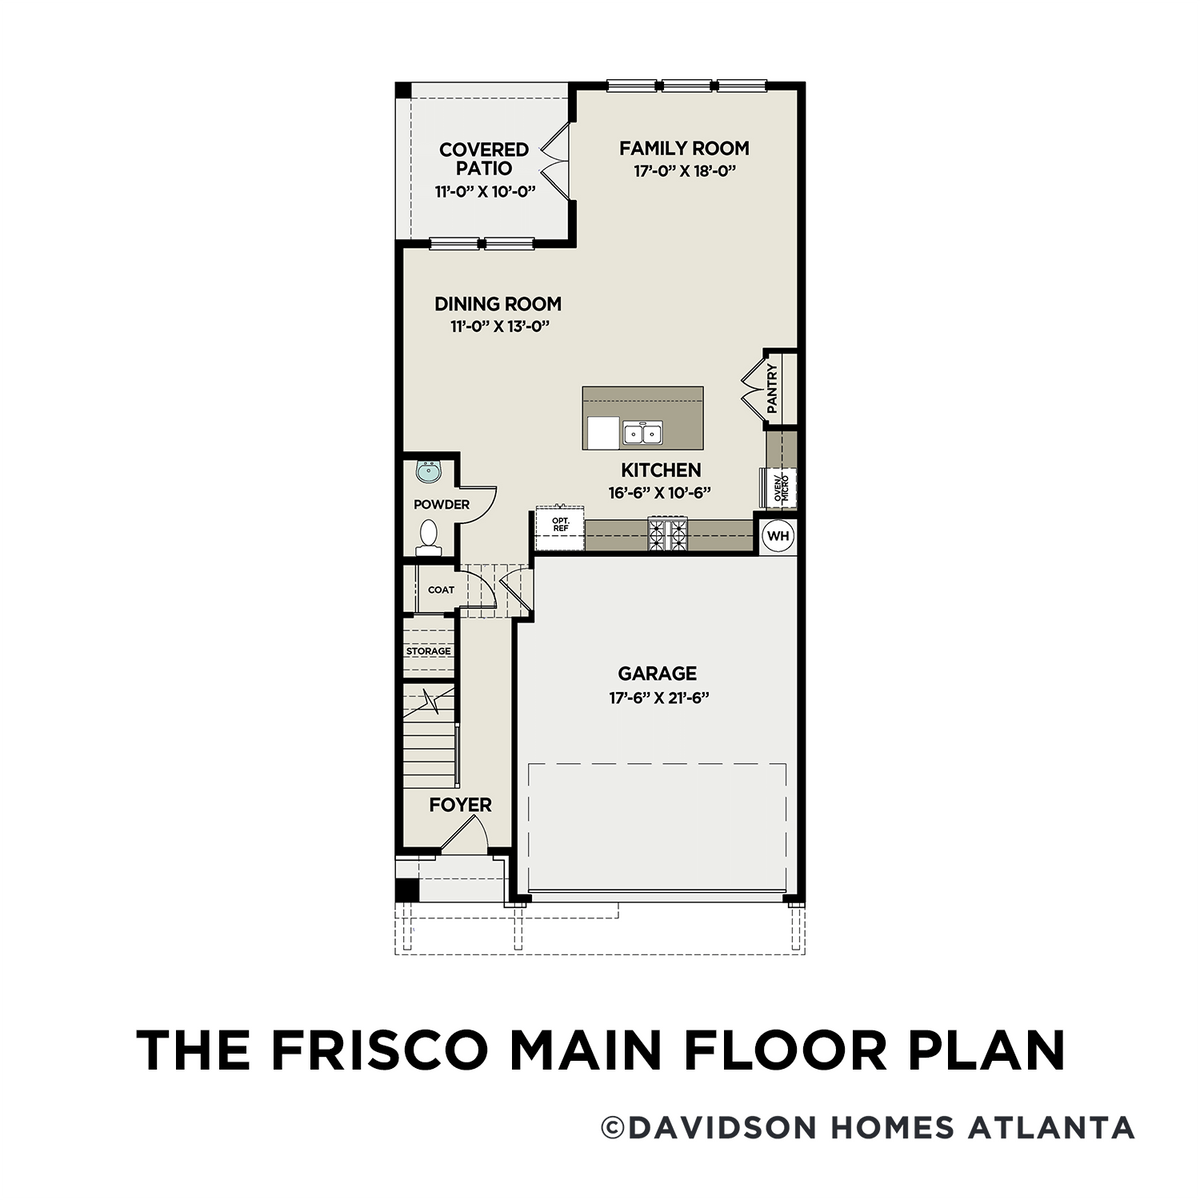 1 - The Frisco B floor plan layout for 408 Falling Water Avenue in Davidson Homes' The Village at Towne Lake community.